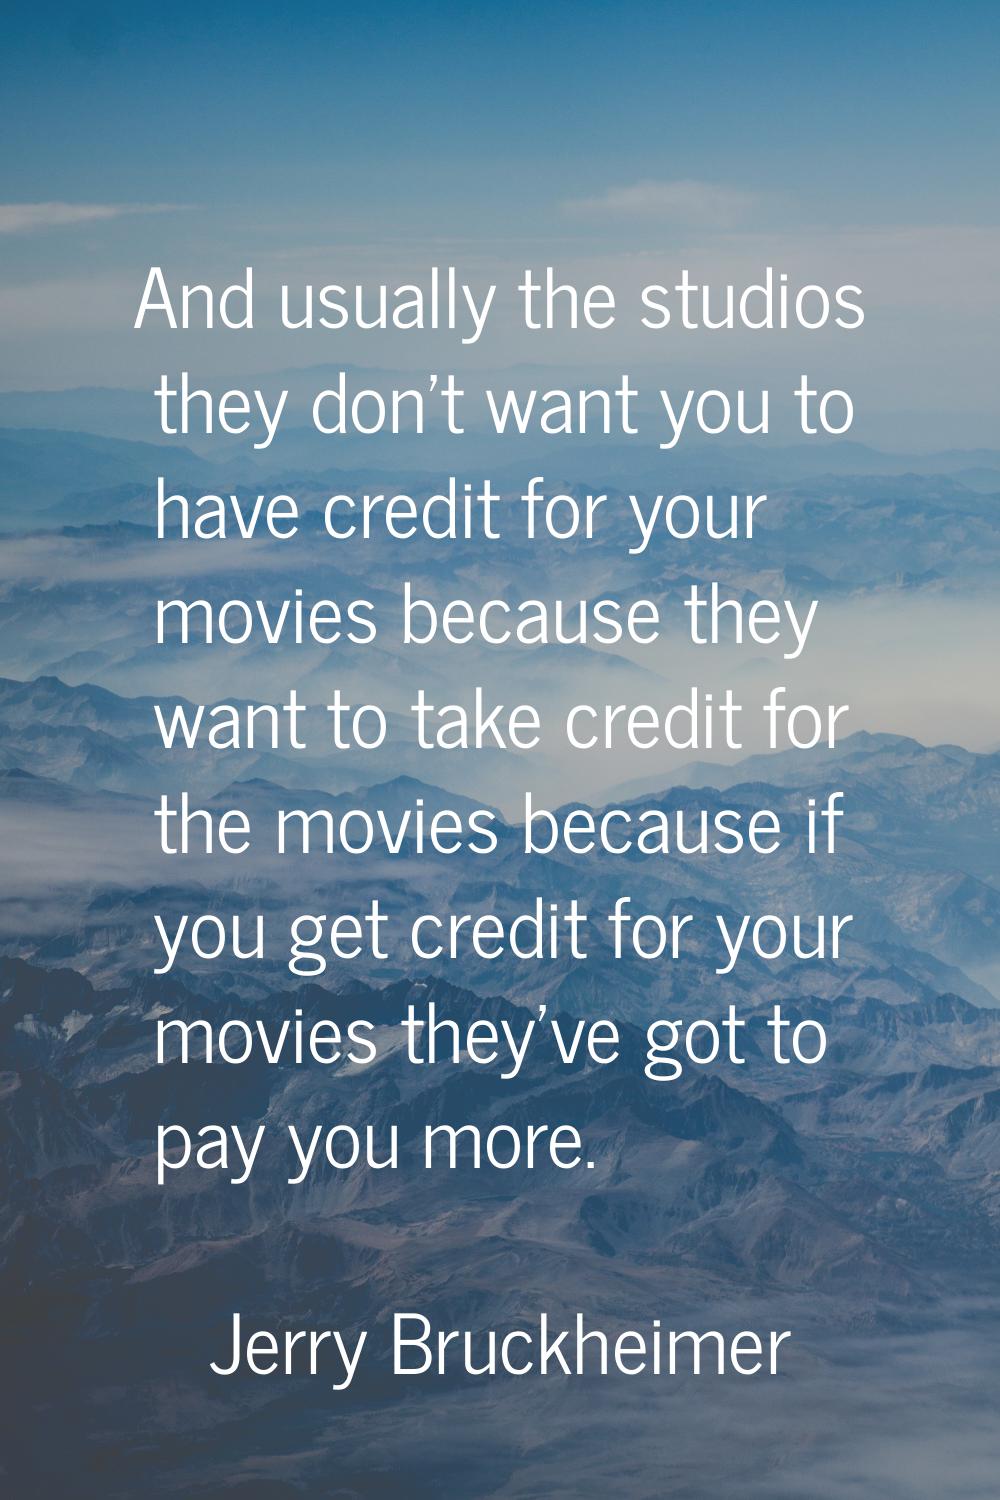 And usually the studios they don't want you to have credit for your movies because they want to tak